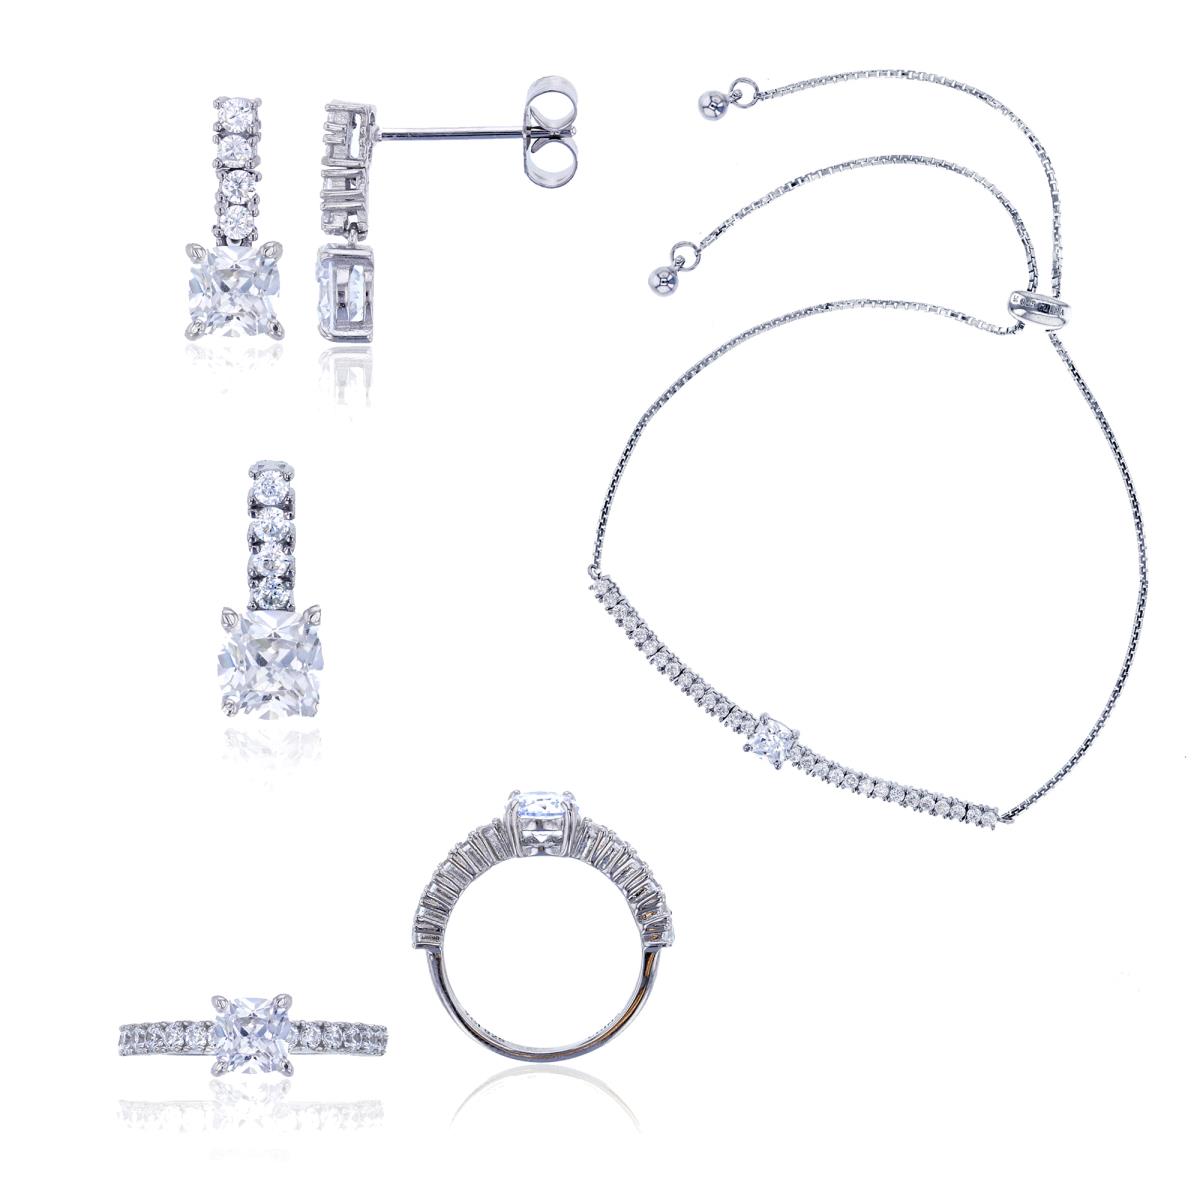 Sterling Silver Rhodium 5mm Cushion Cut Jewelry Set (Bracelet, Earring, Ring and 18" Necklace)